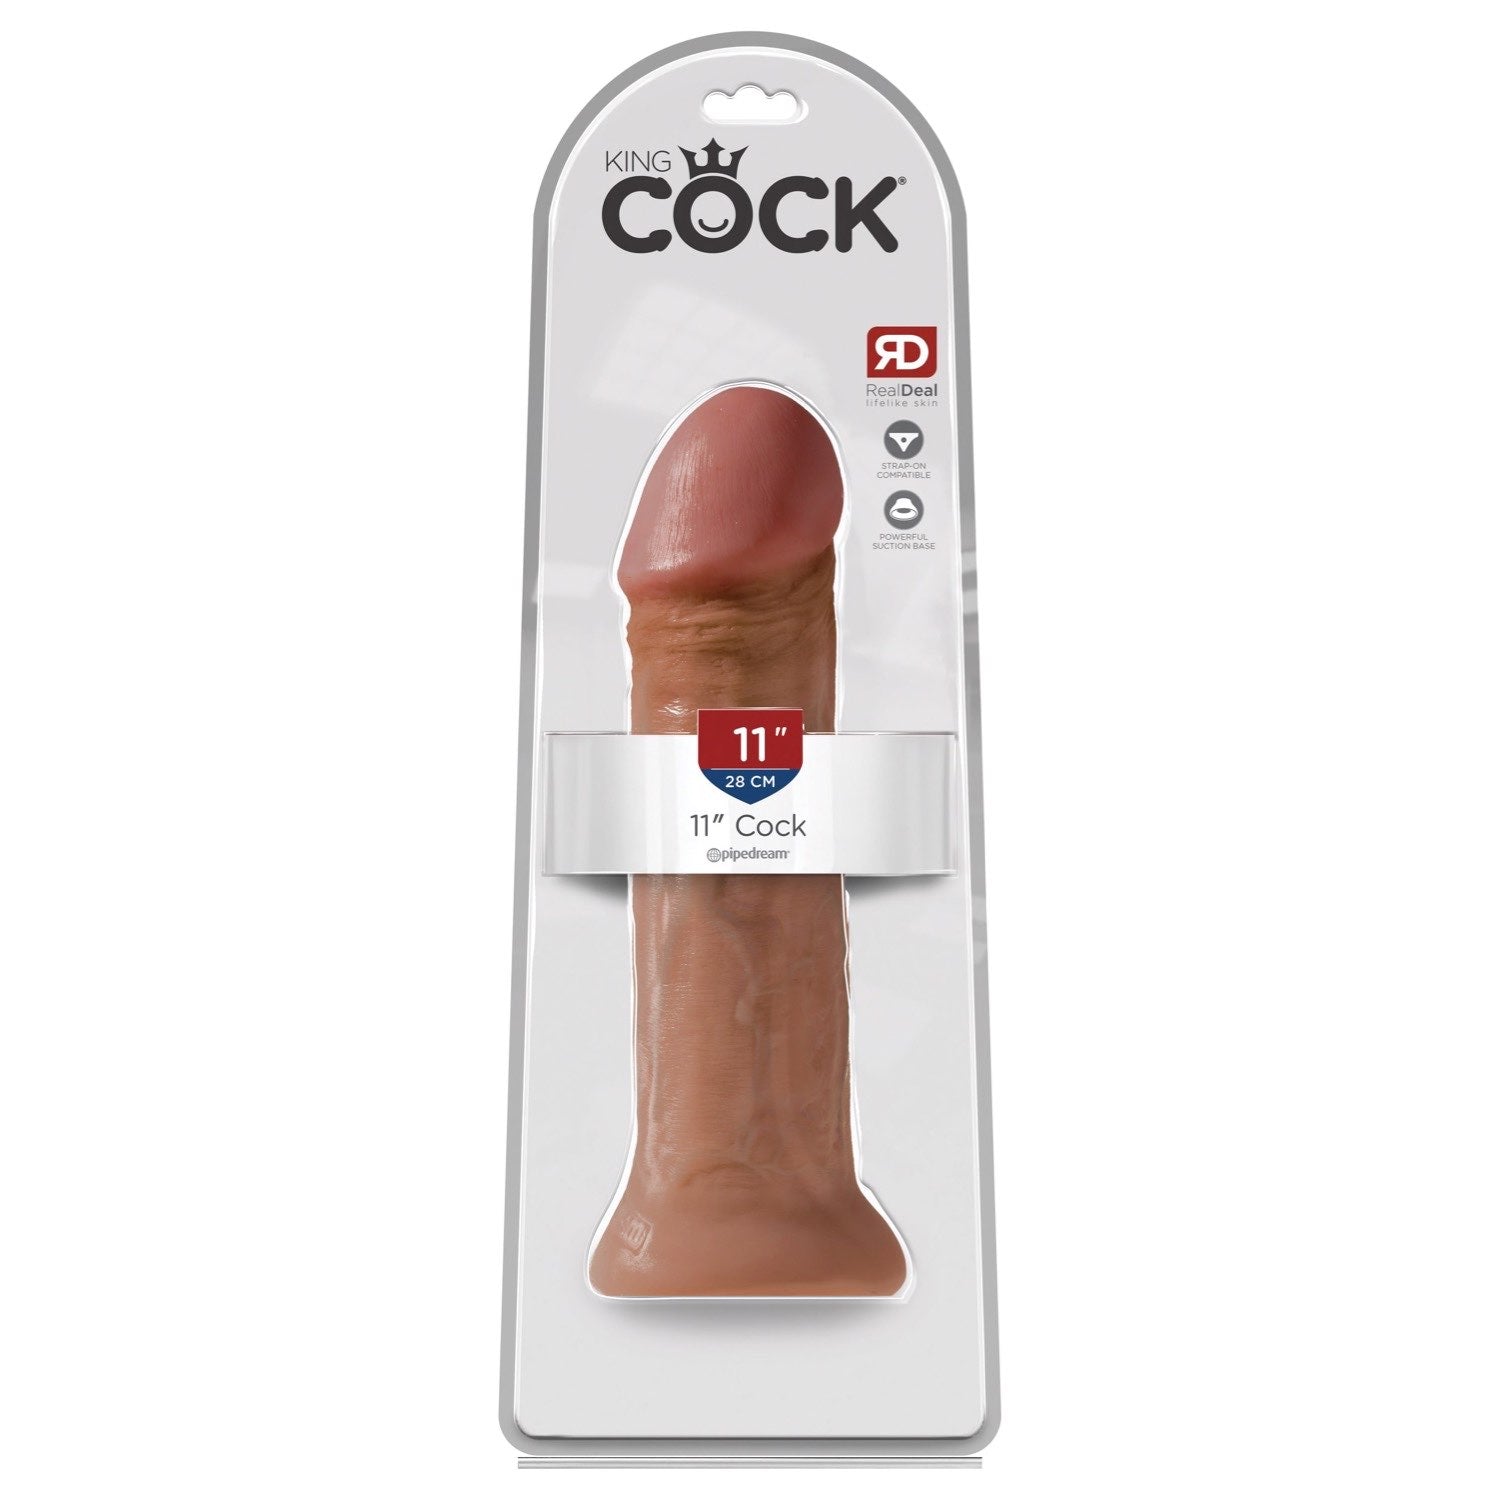 King Cock 11IN Cock - Tan by Pipedream